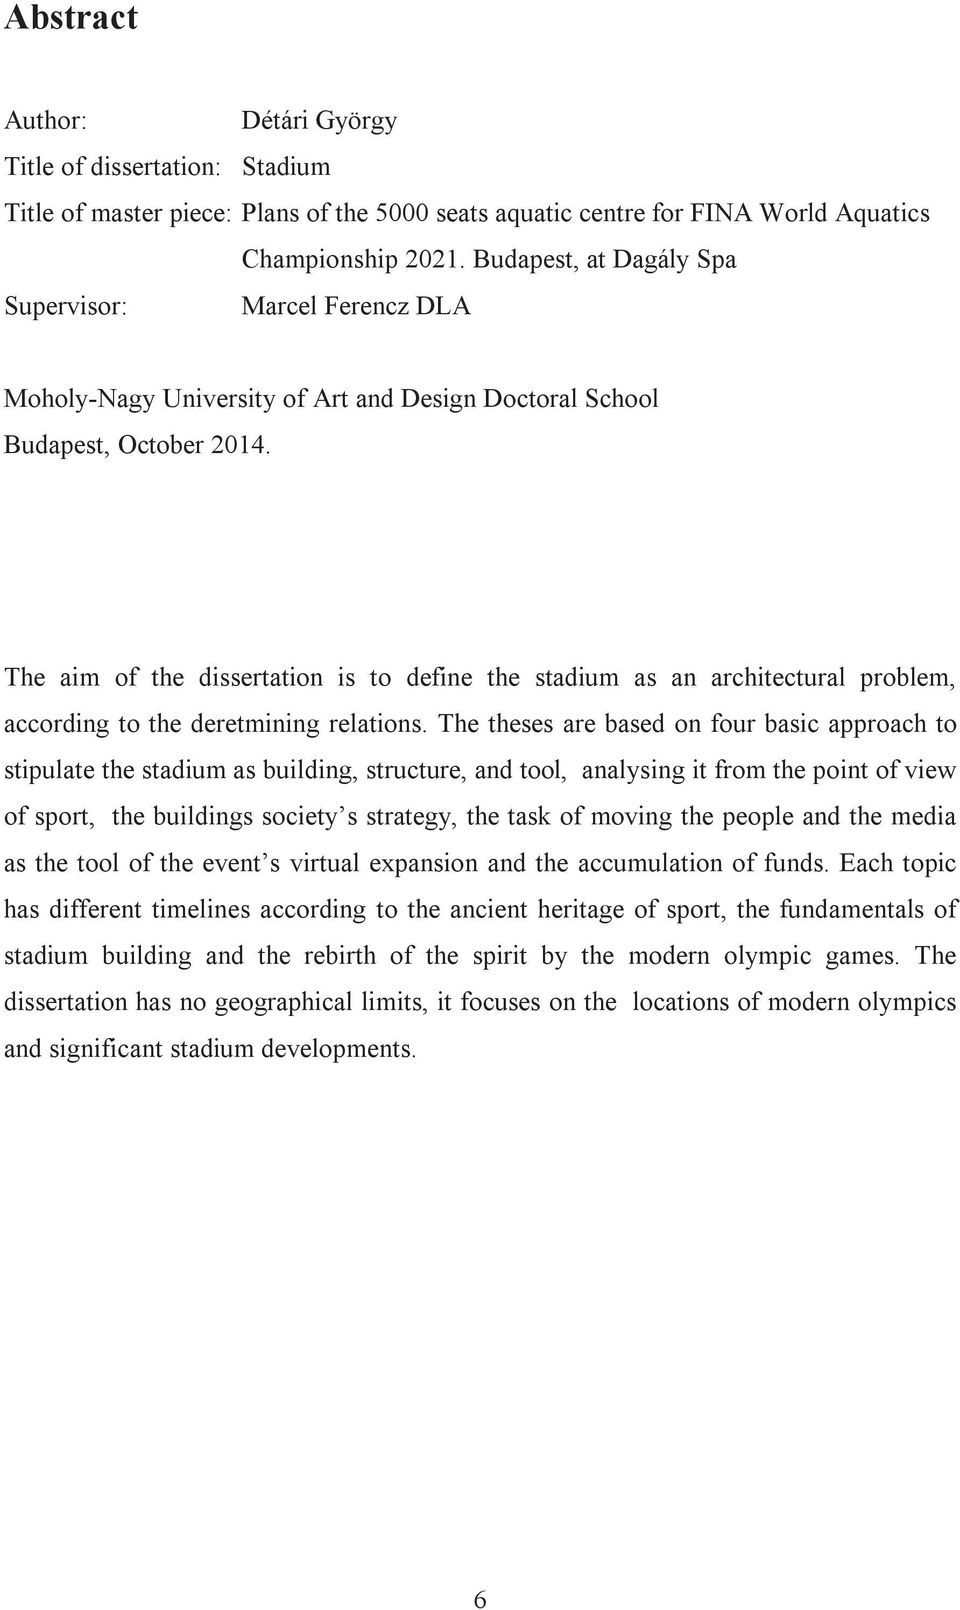 The aim of the dissertation is to define the stadium as an architectural problem, according to the deretmining relations.